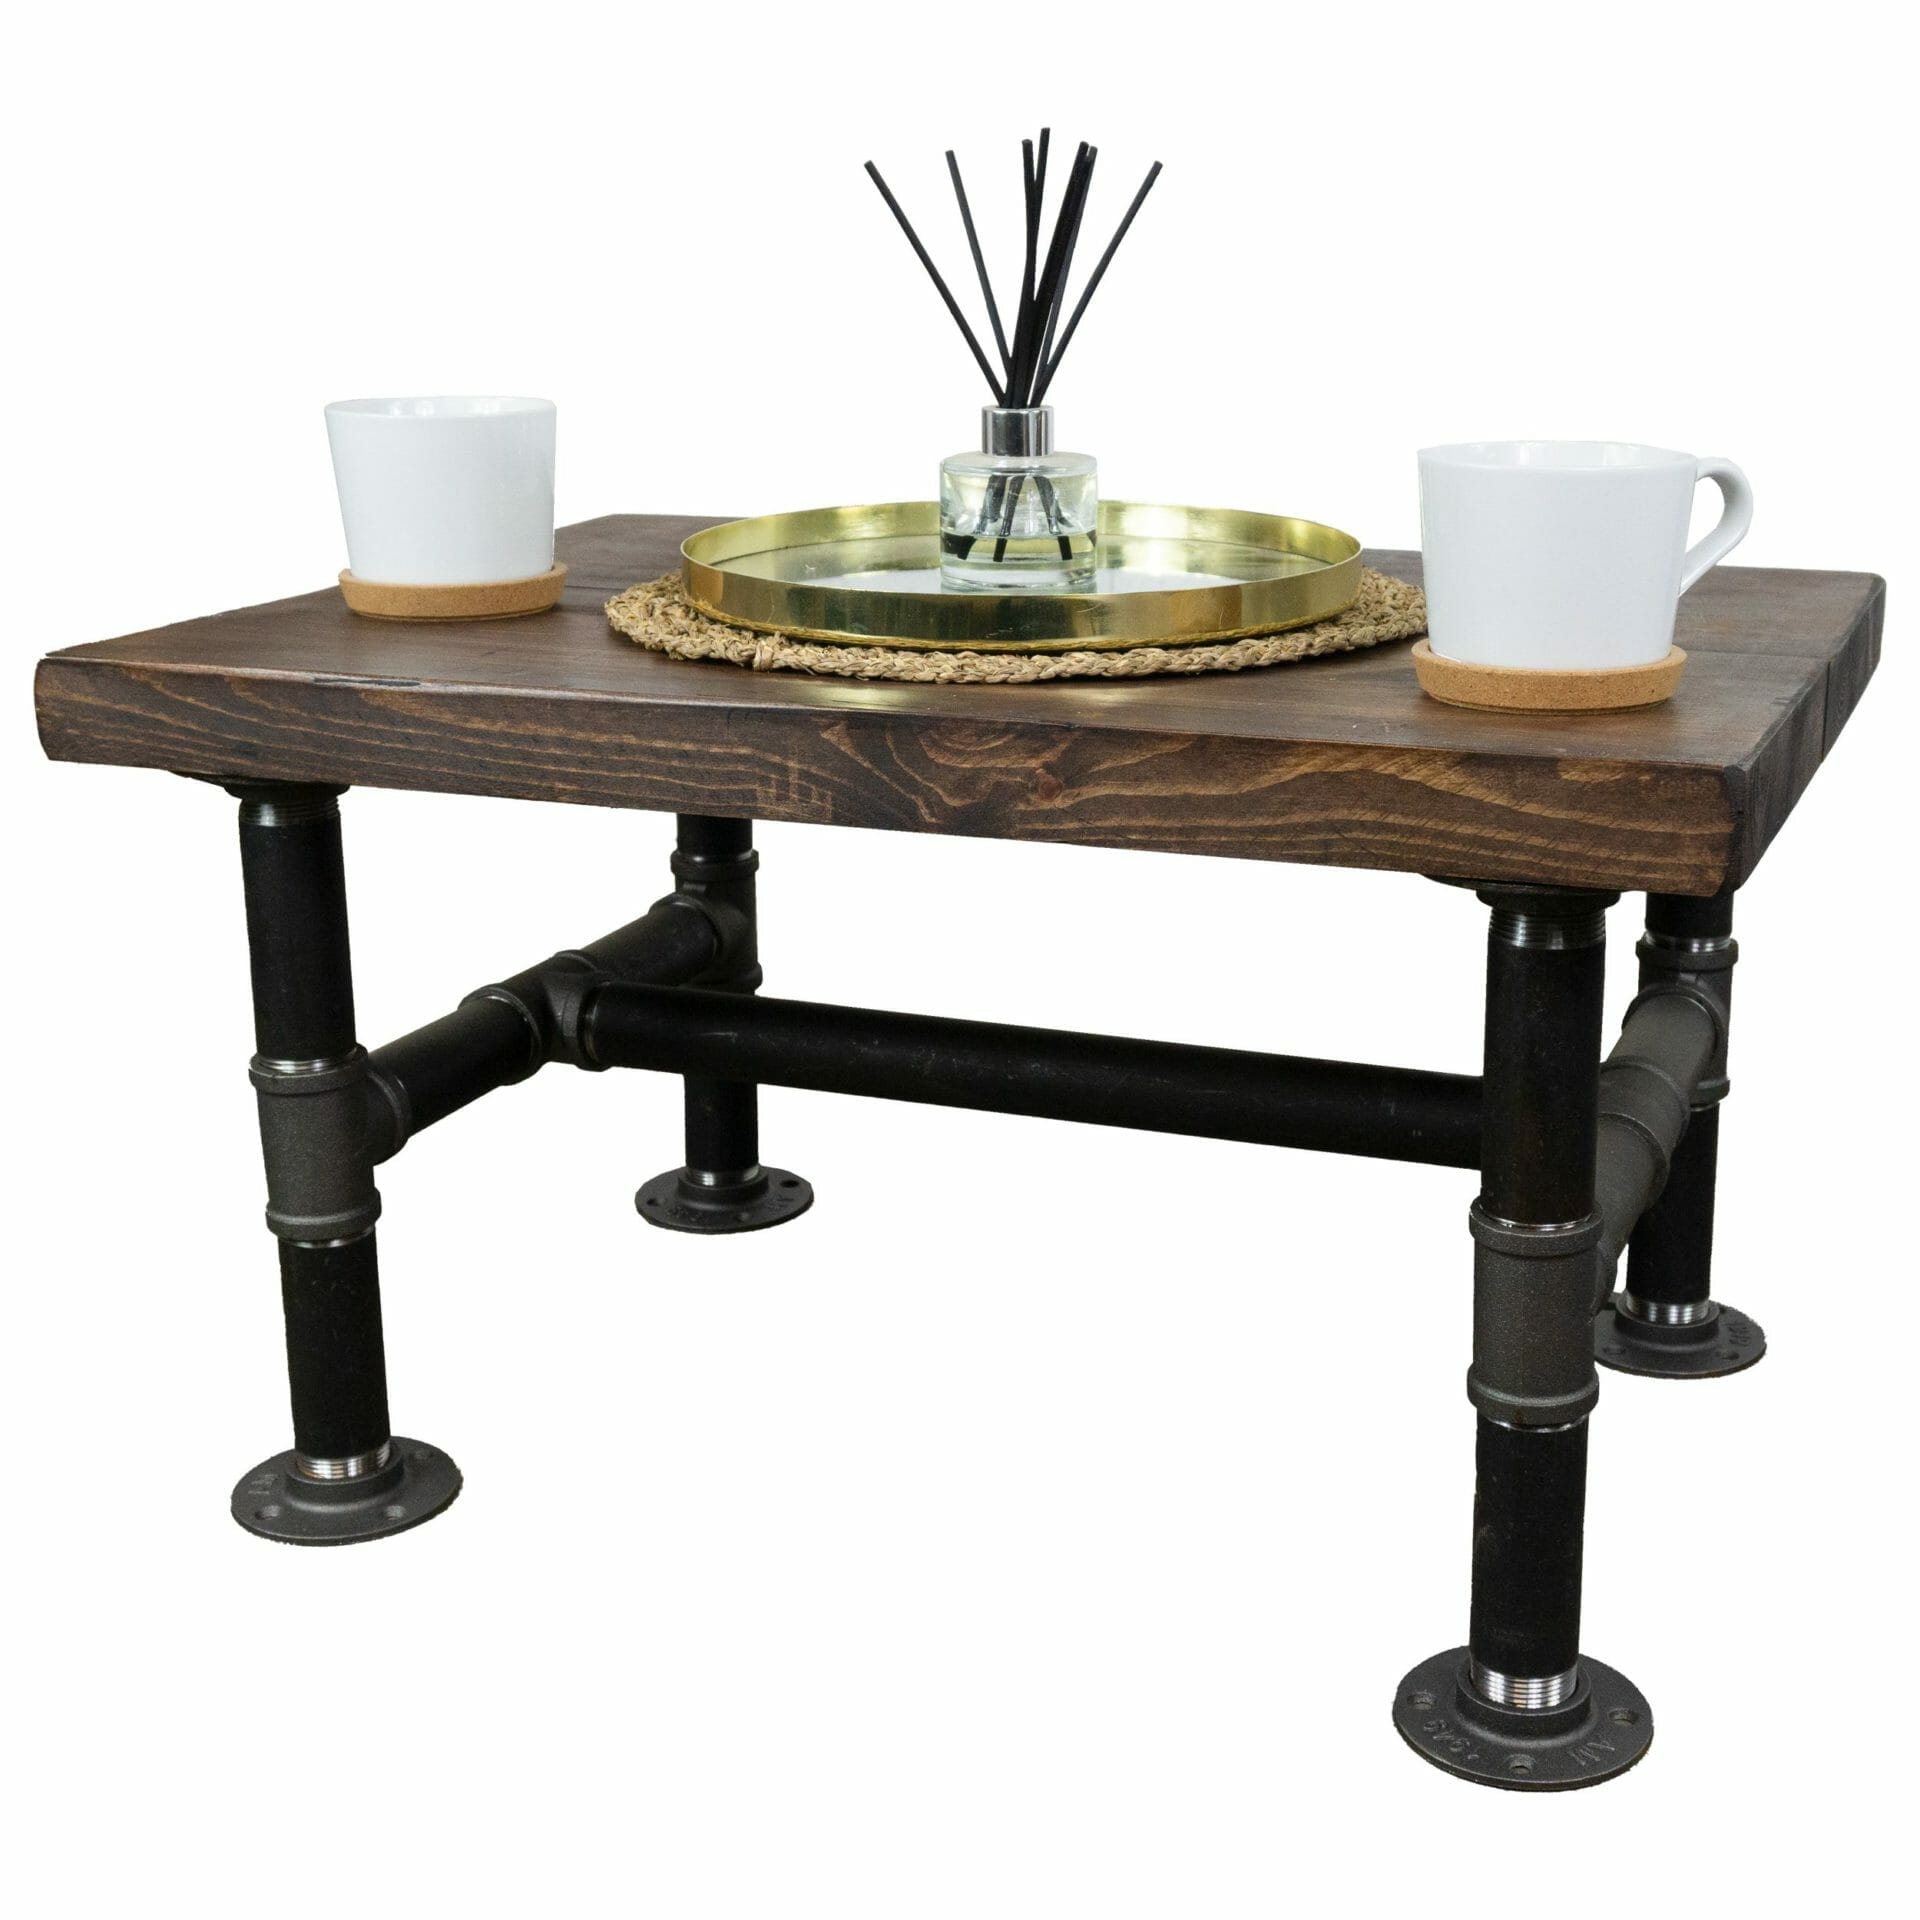 black steel industrial pipe table with reclaimed wooden top